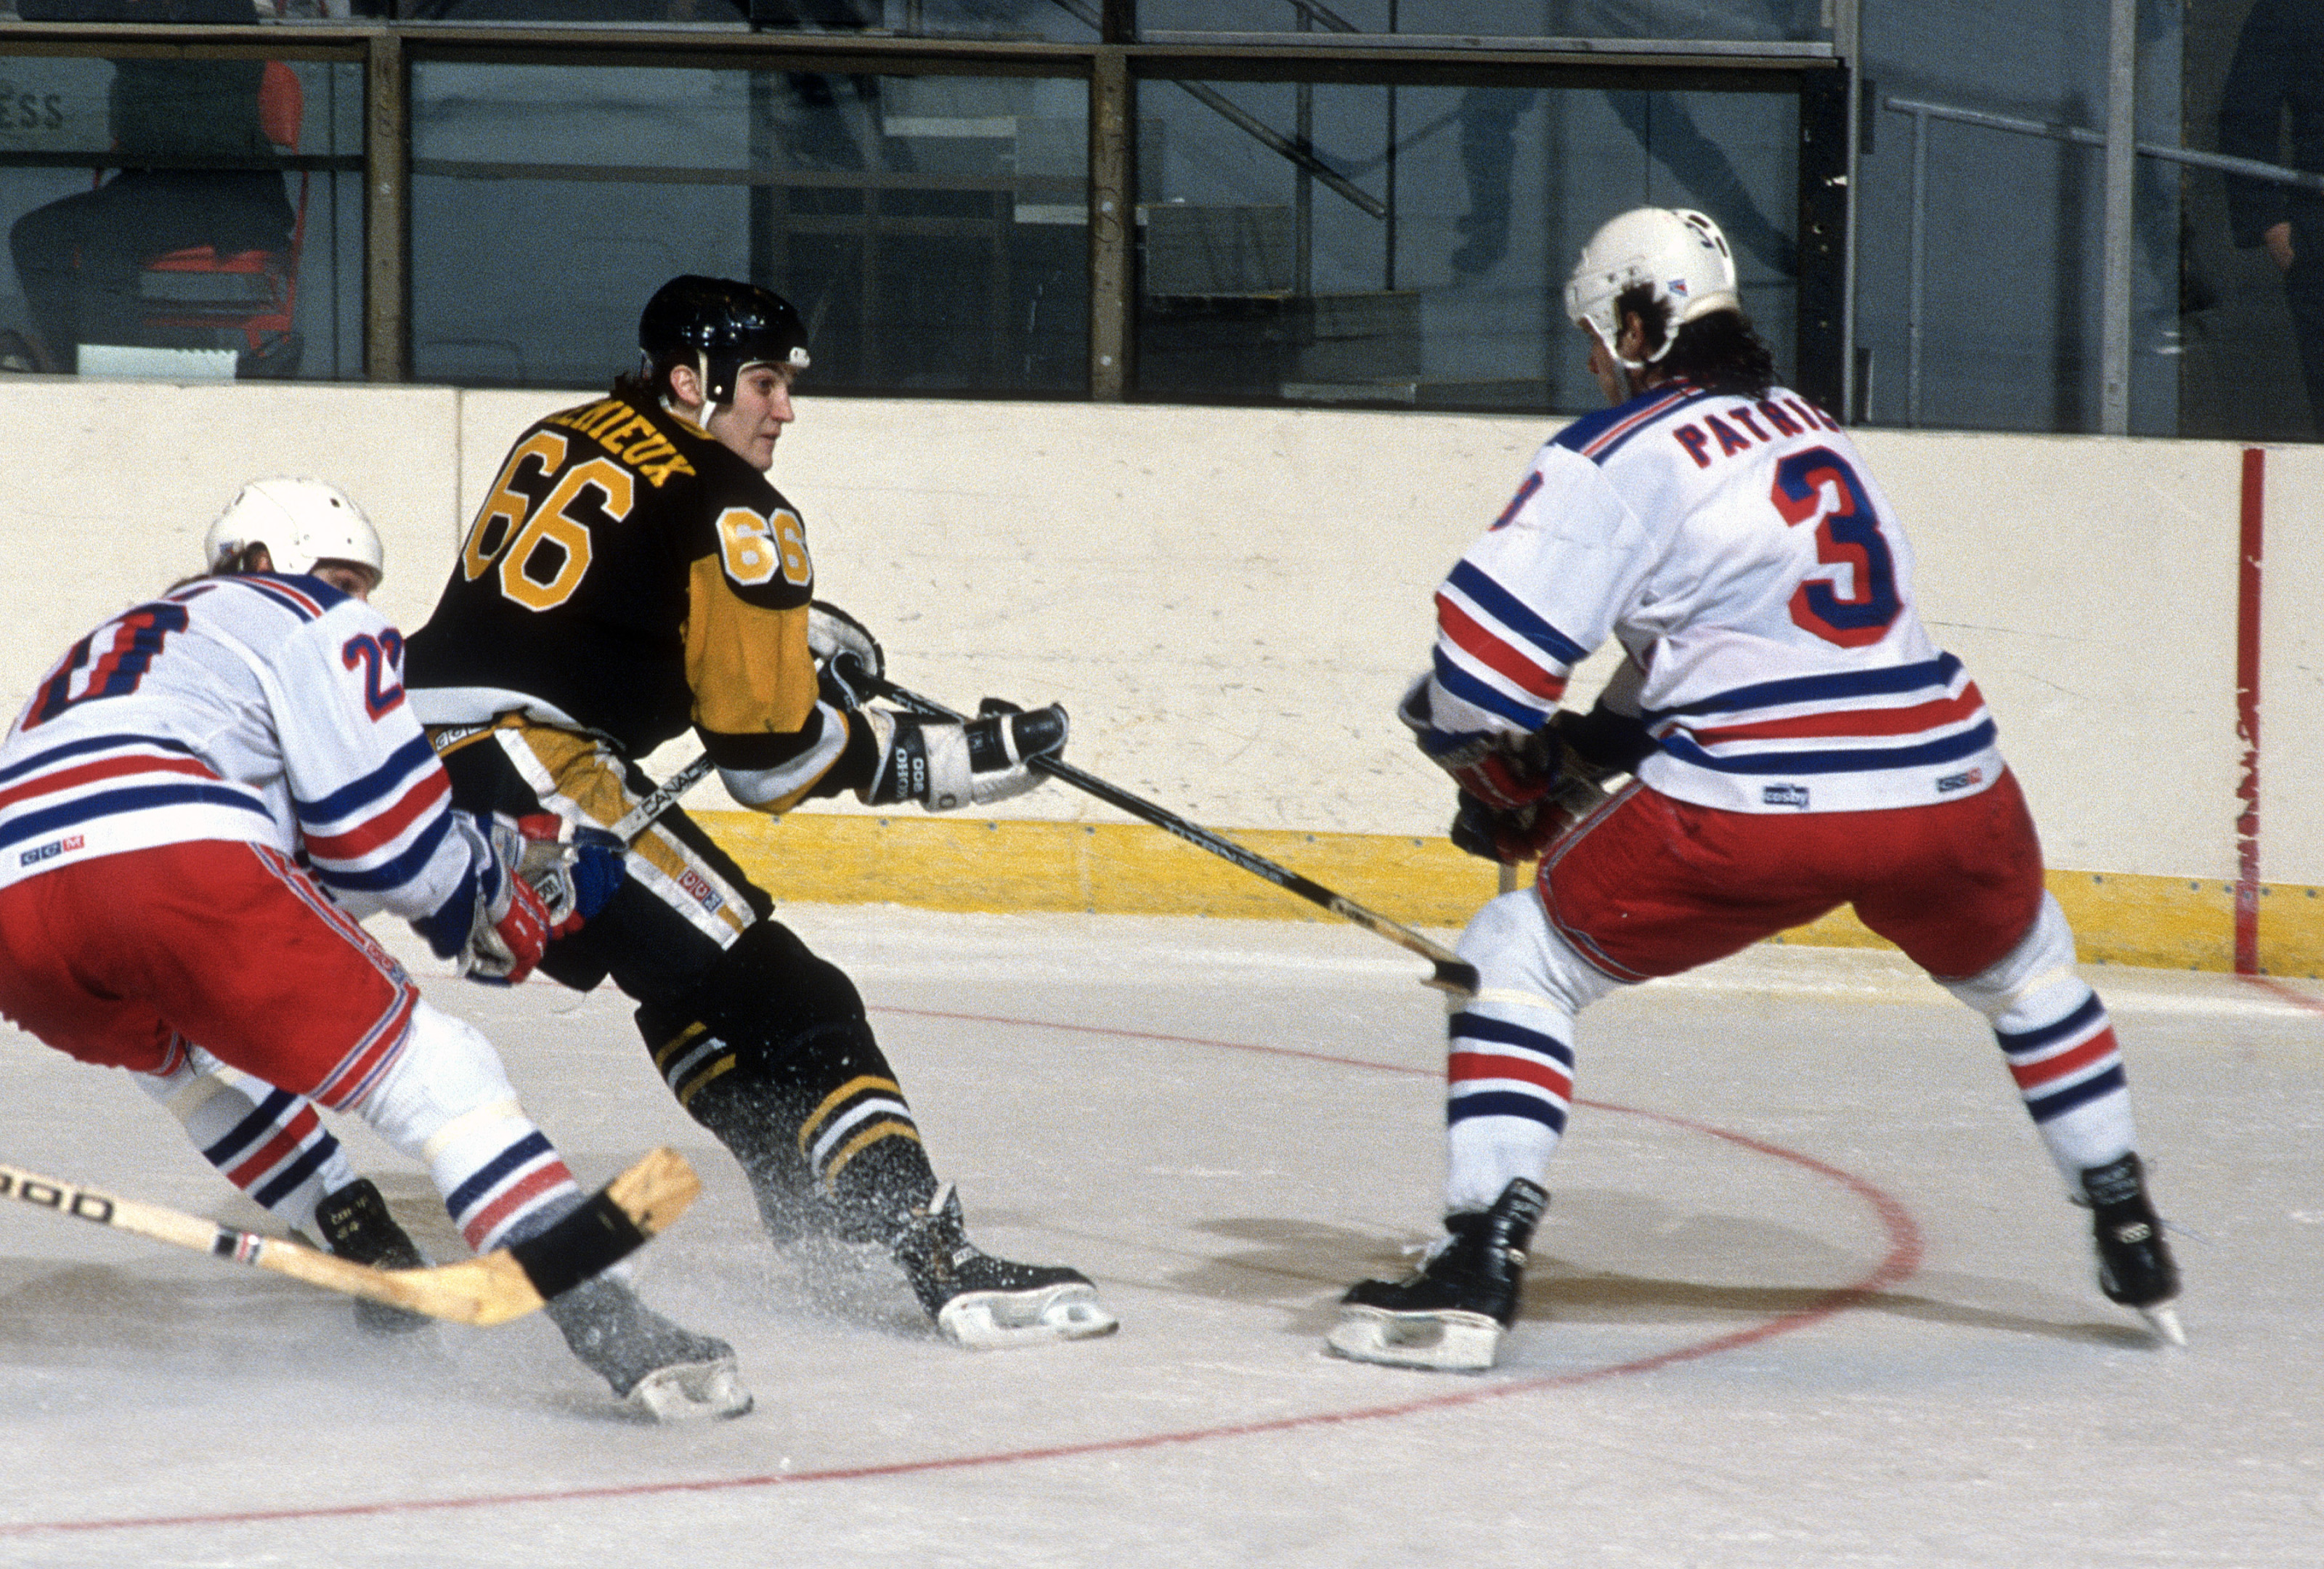 Mario Lemieux of the Pittsburgh Penguins skates against the